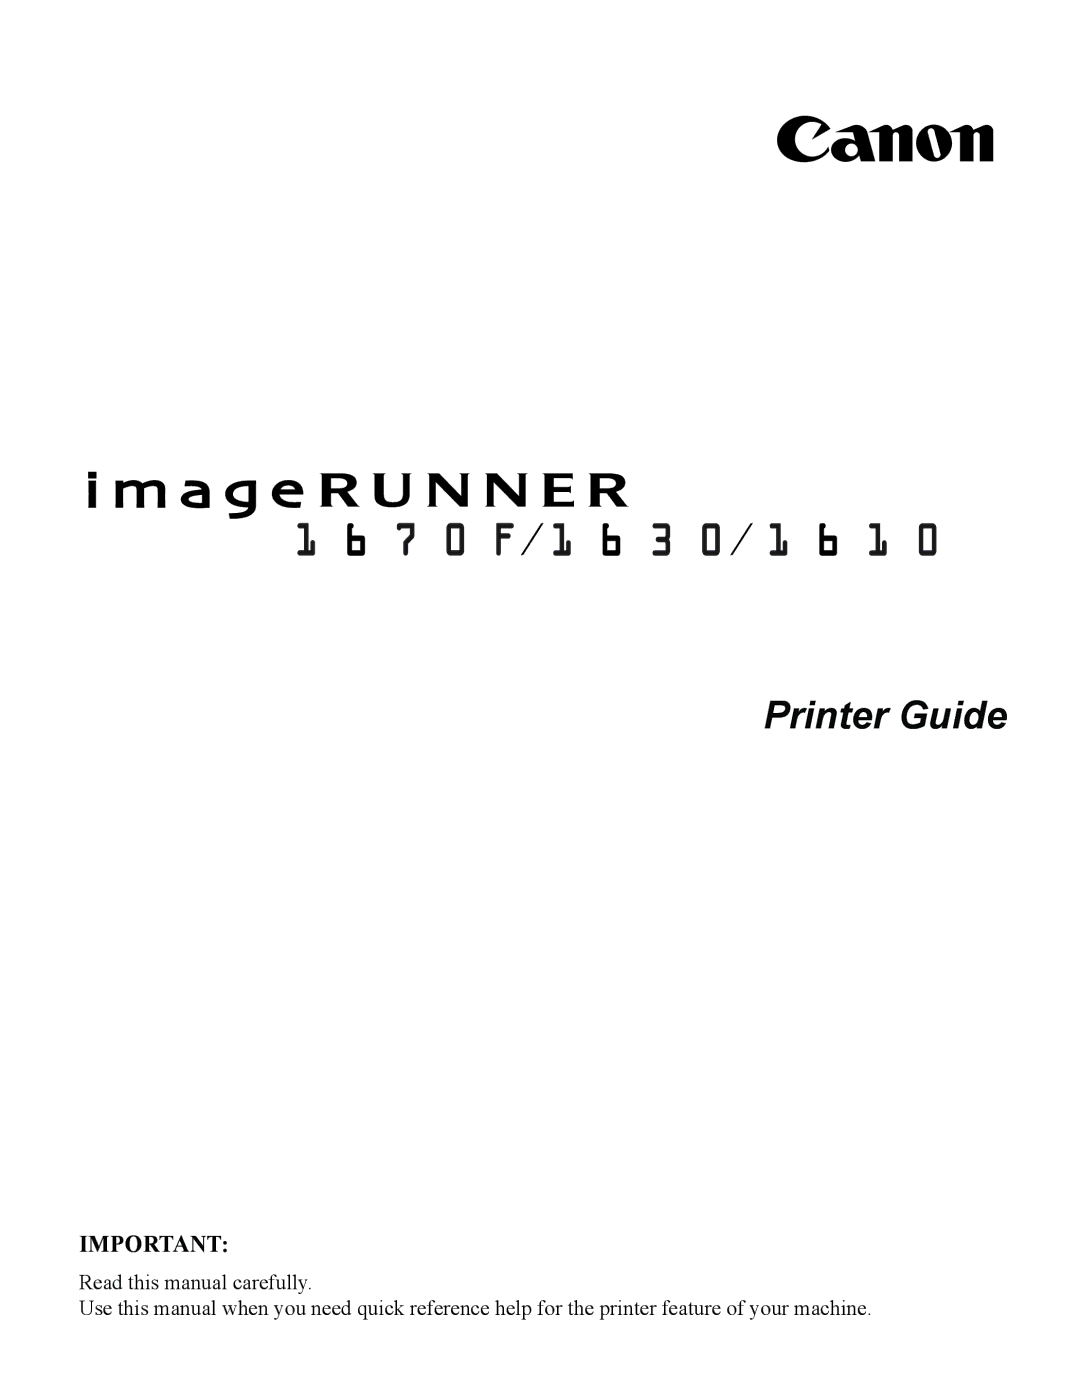 Canon 1630, 1670F, 1610 manual Reference Guide 